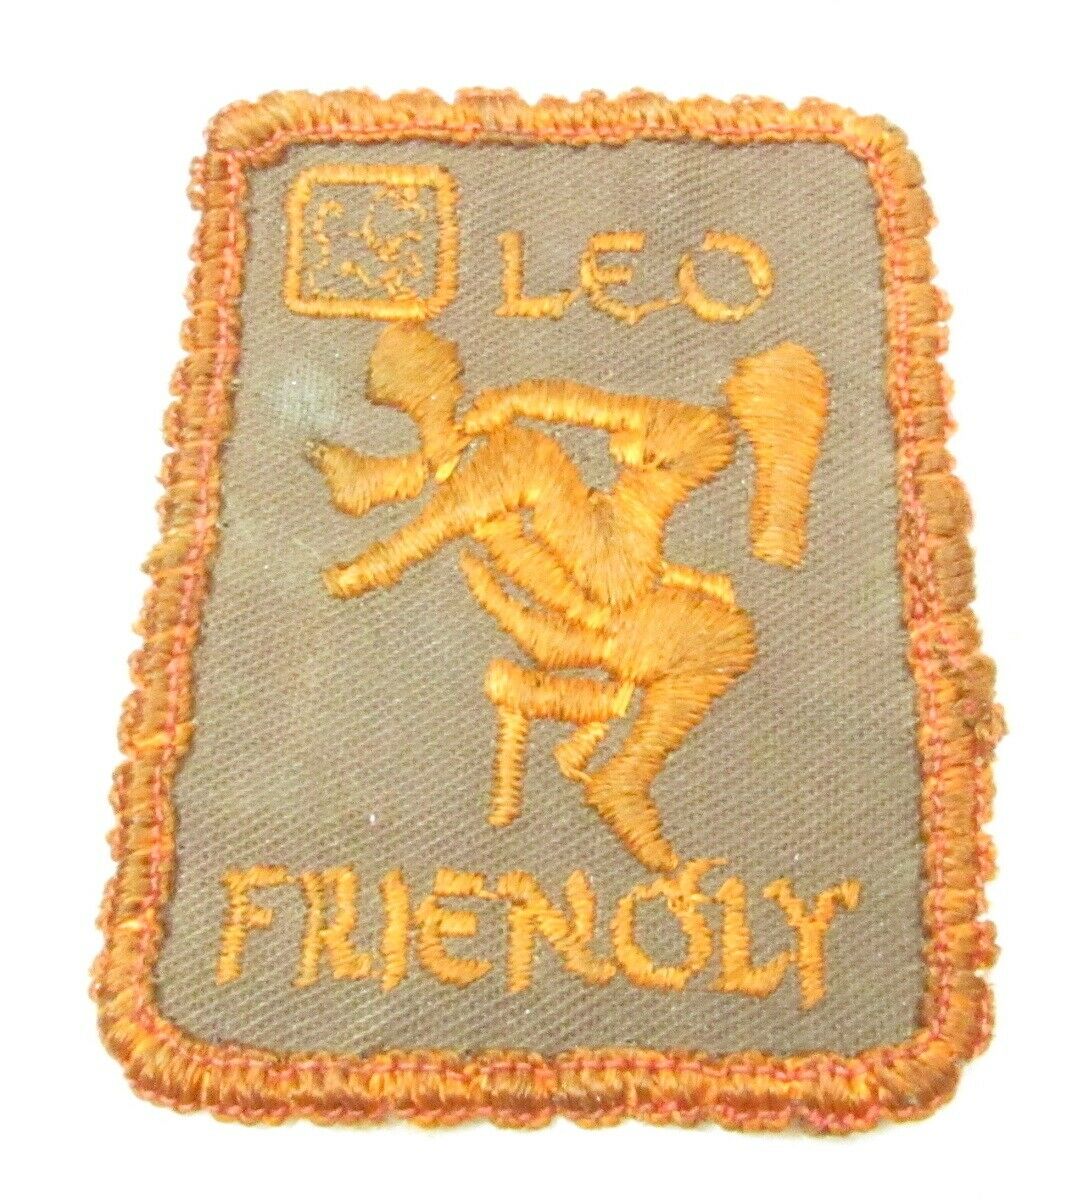 Vintage Used Leo Friendly Embroidered Patch -d